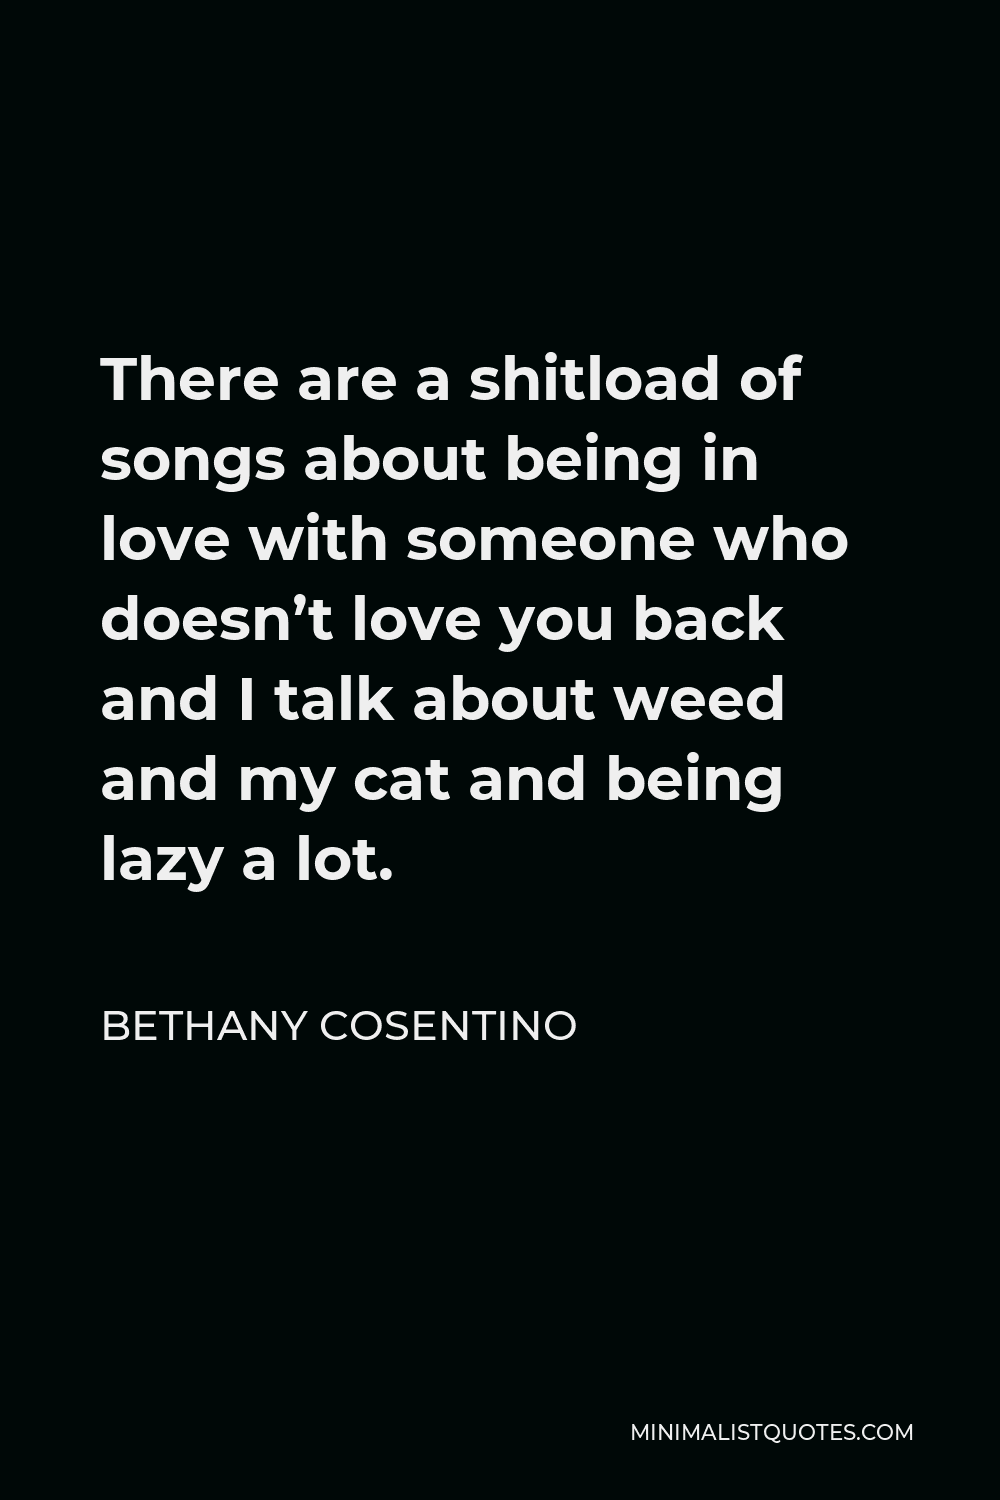 Bethany Cosentino Quote - There are a shitload of songs about being in love with someone who doesn’t love you back and I talk about weed and my cat and being lazy a lot.